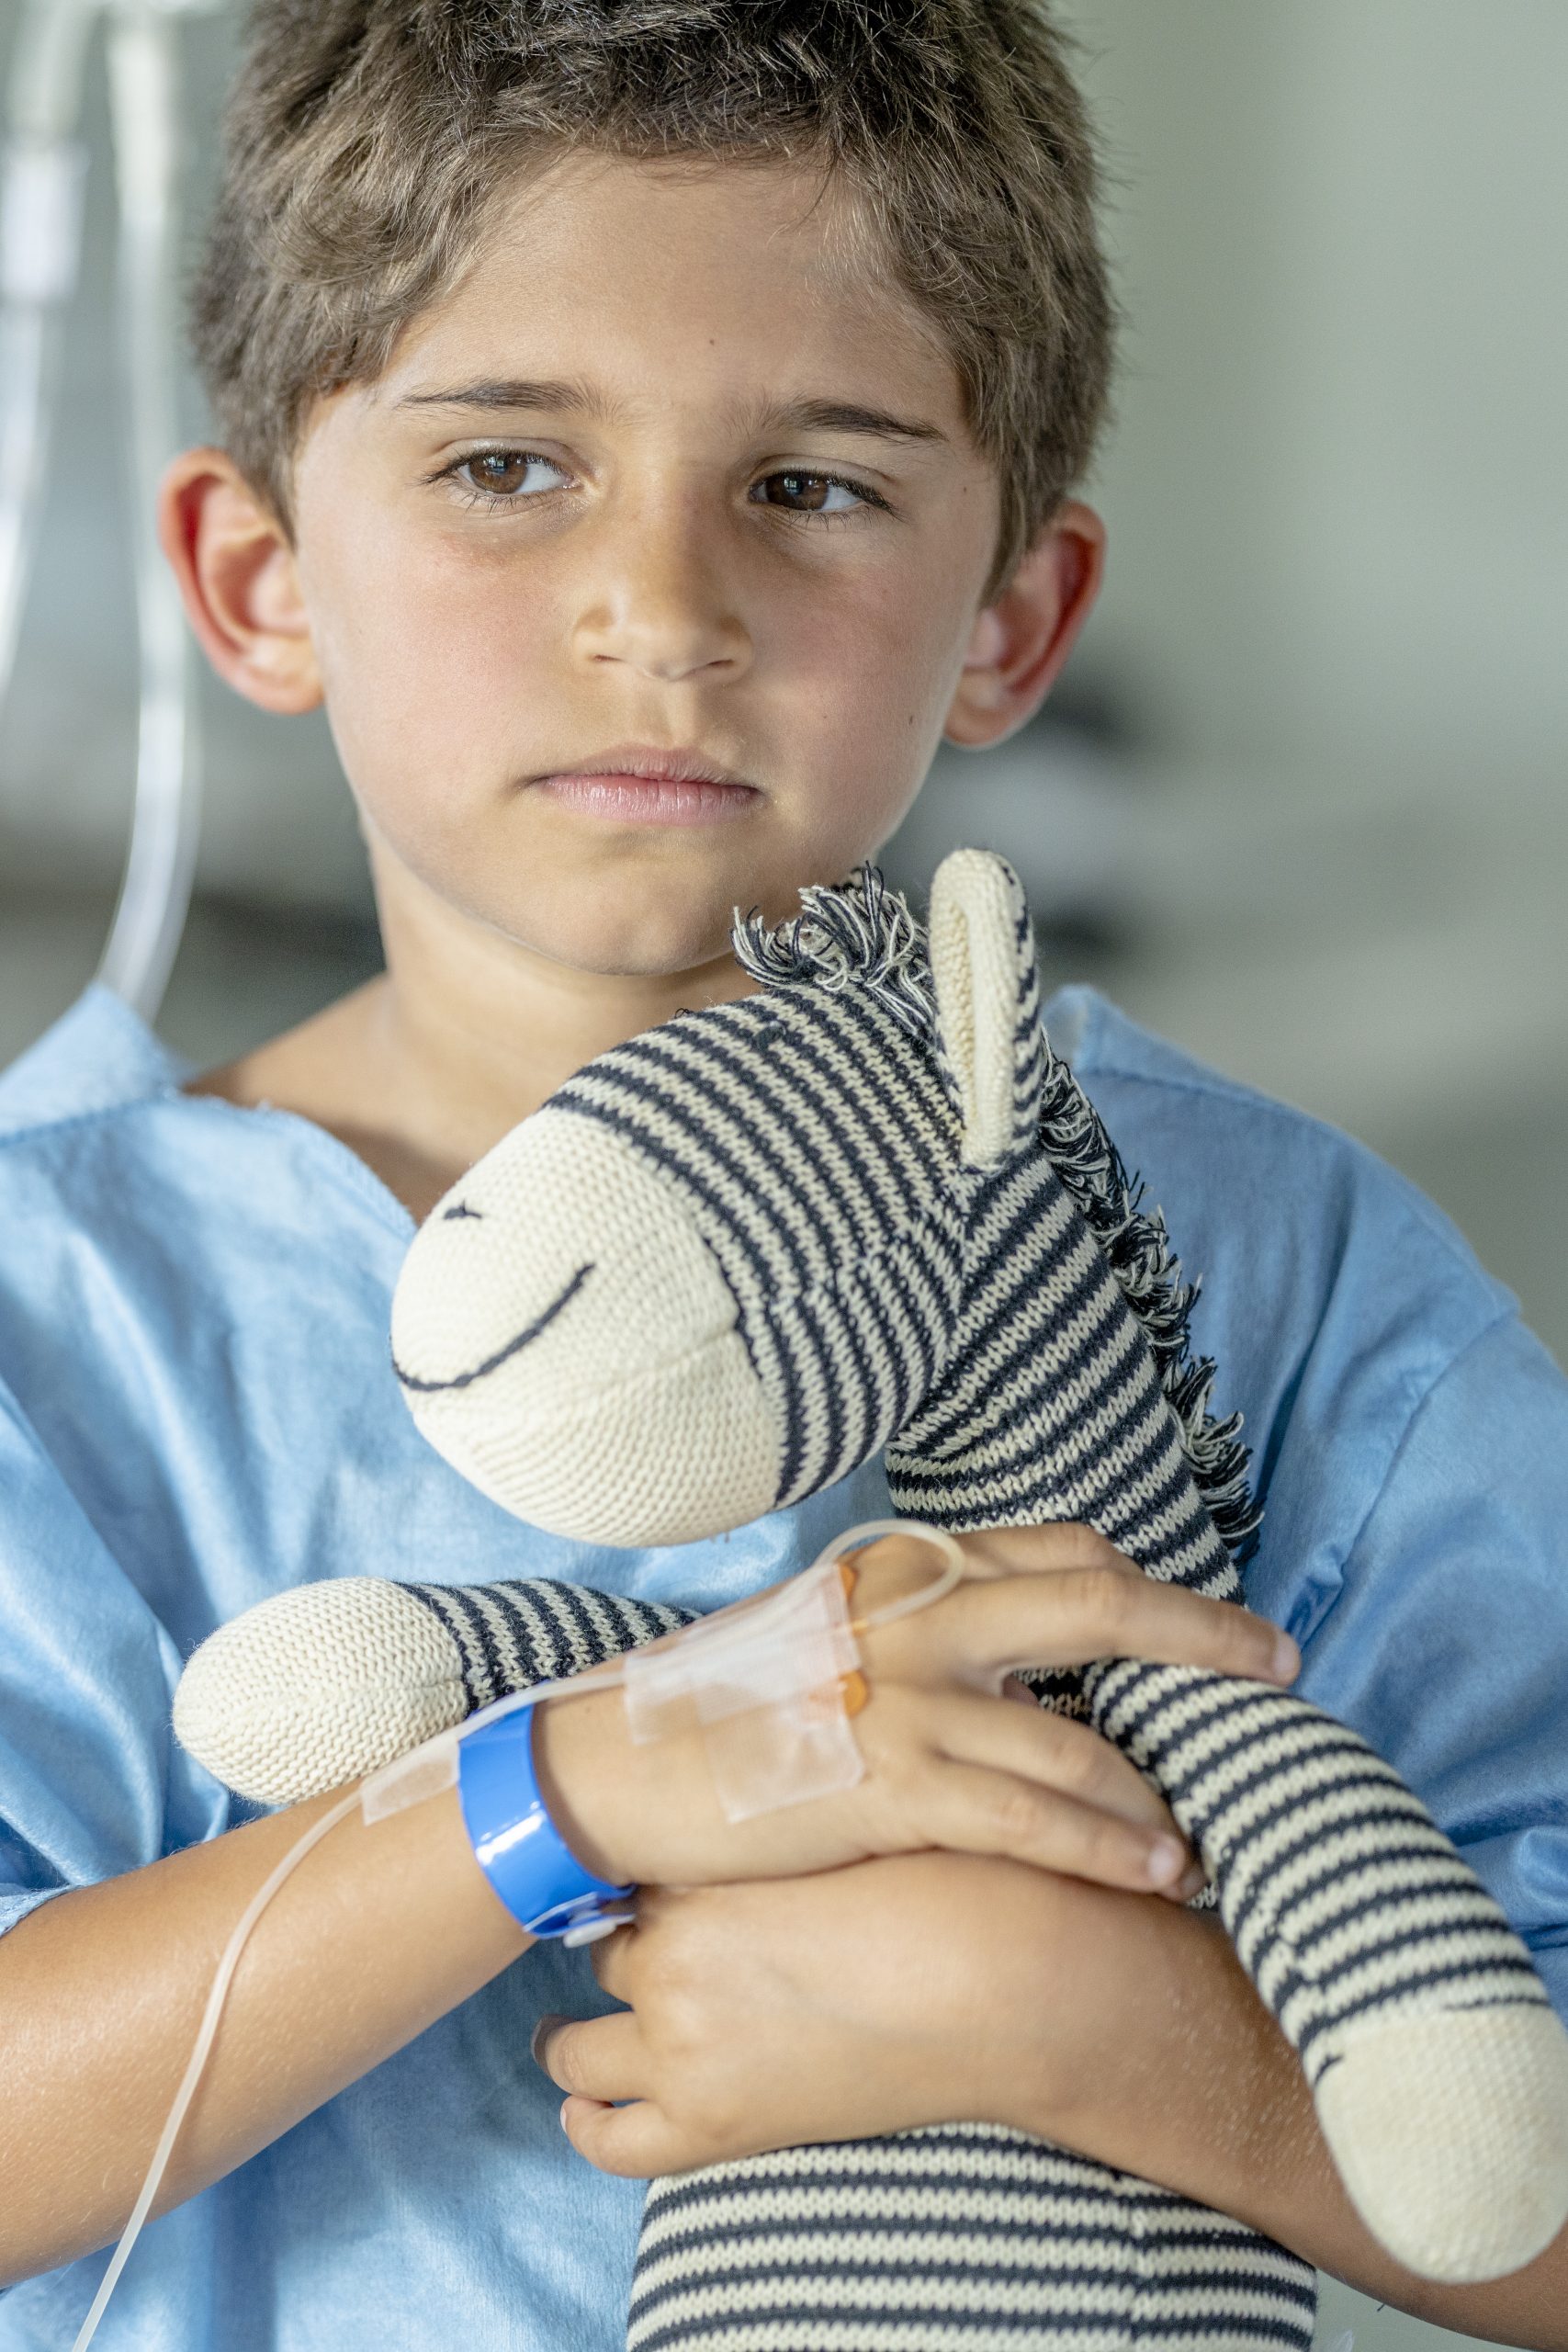 Close up of a six year old boy sitting in the hospital with an IV drip holding his favorite stuffed animal and looking concerned